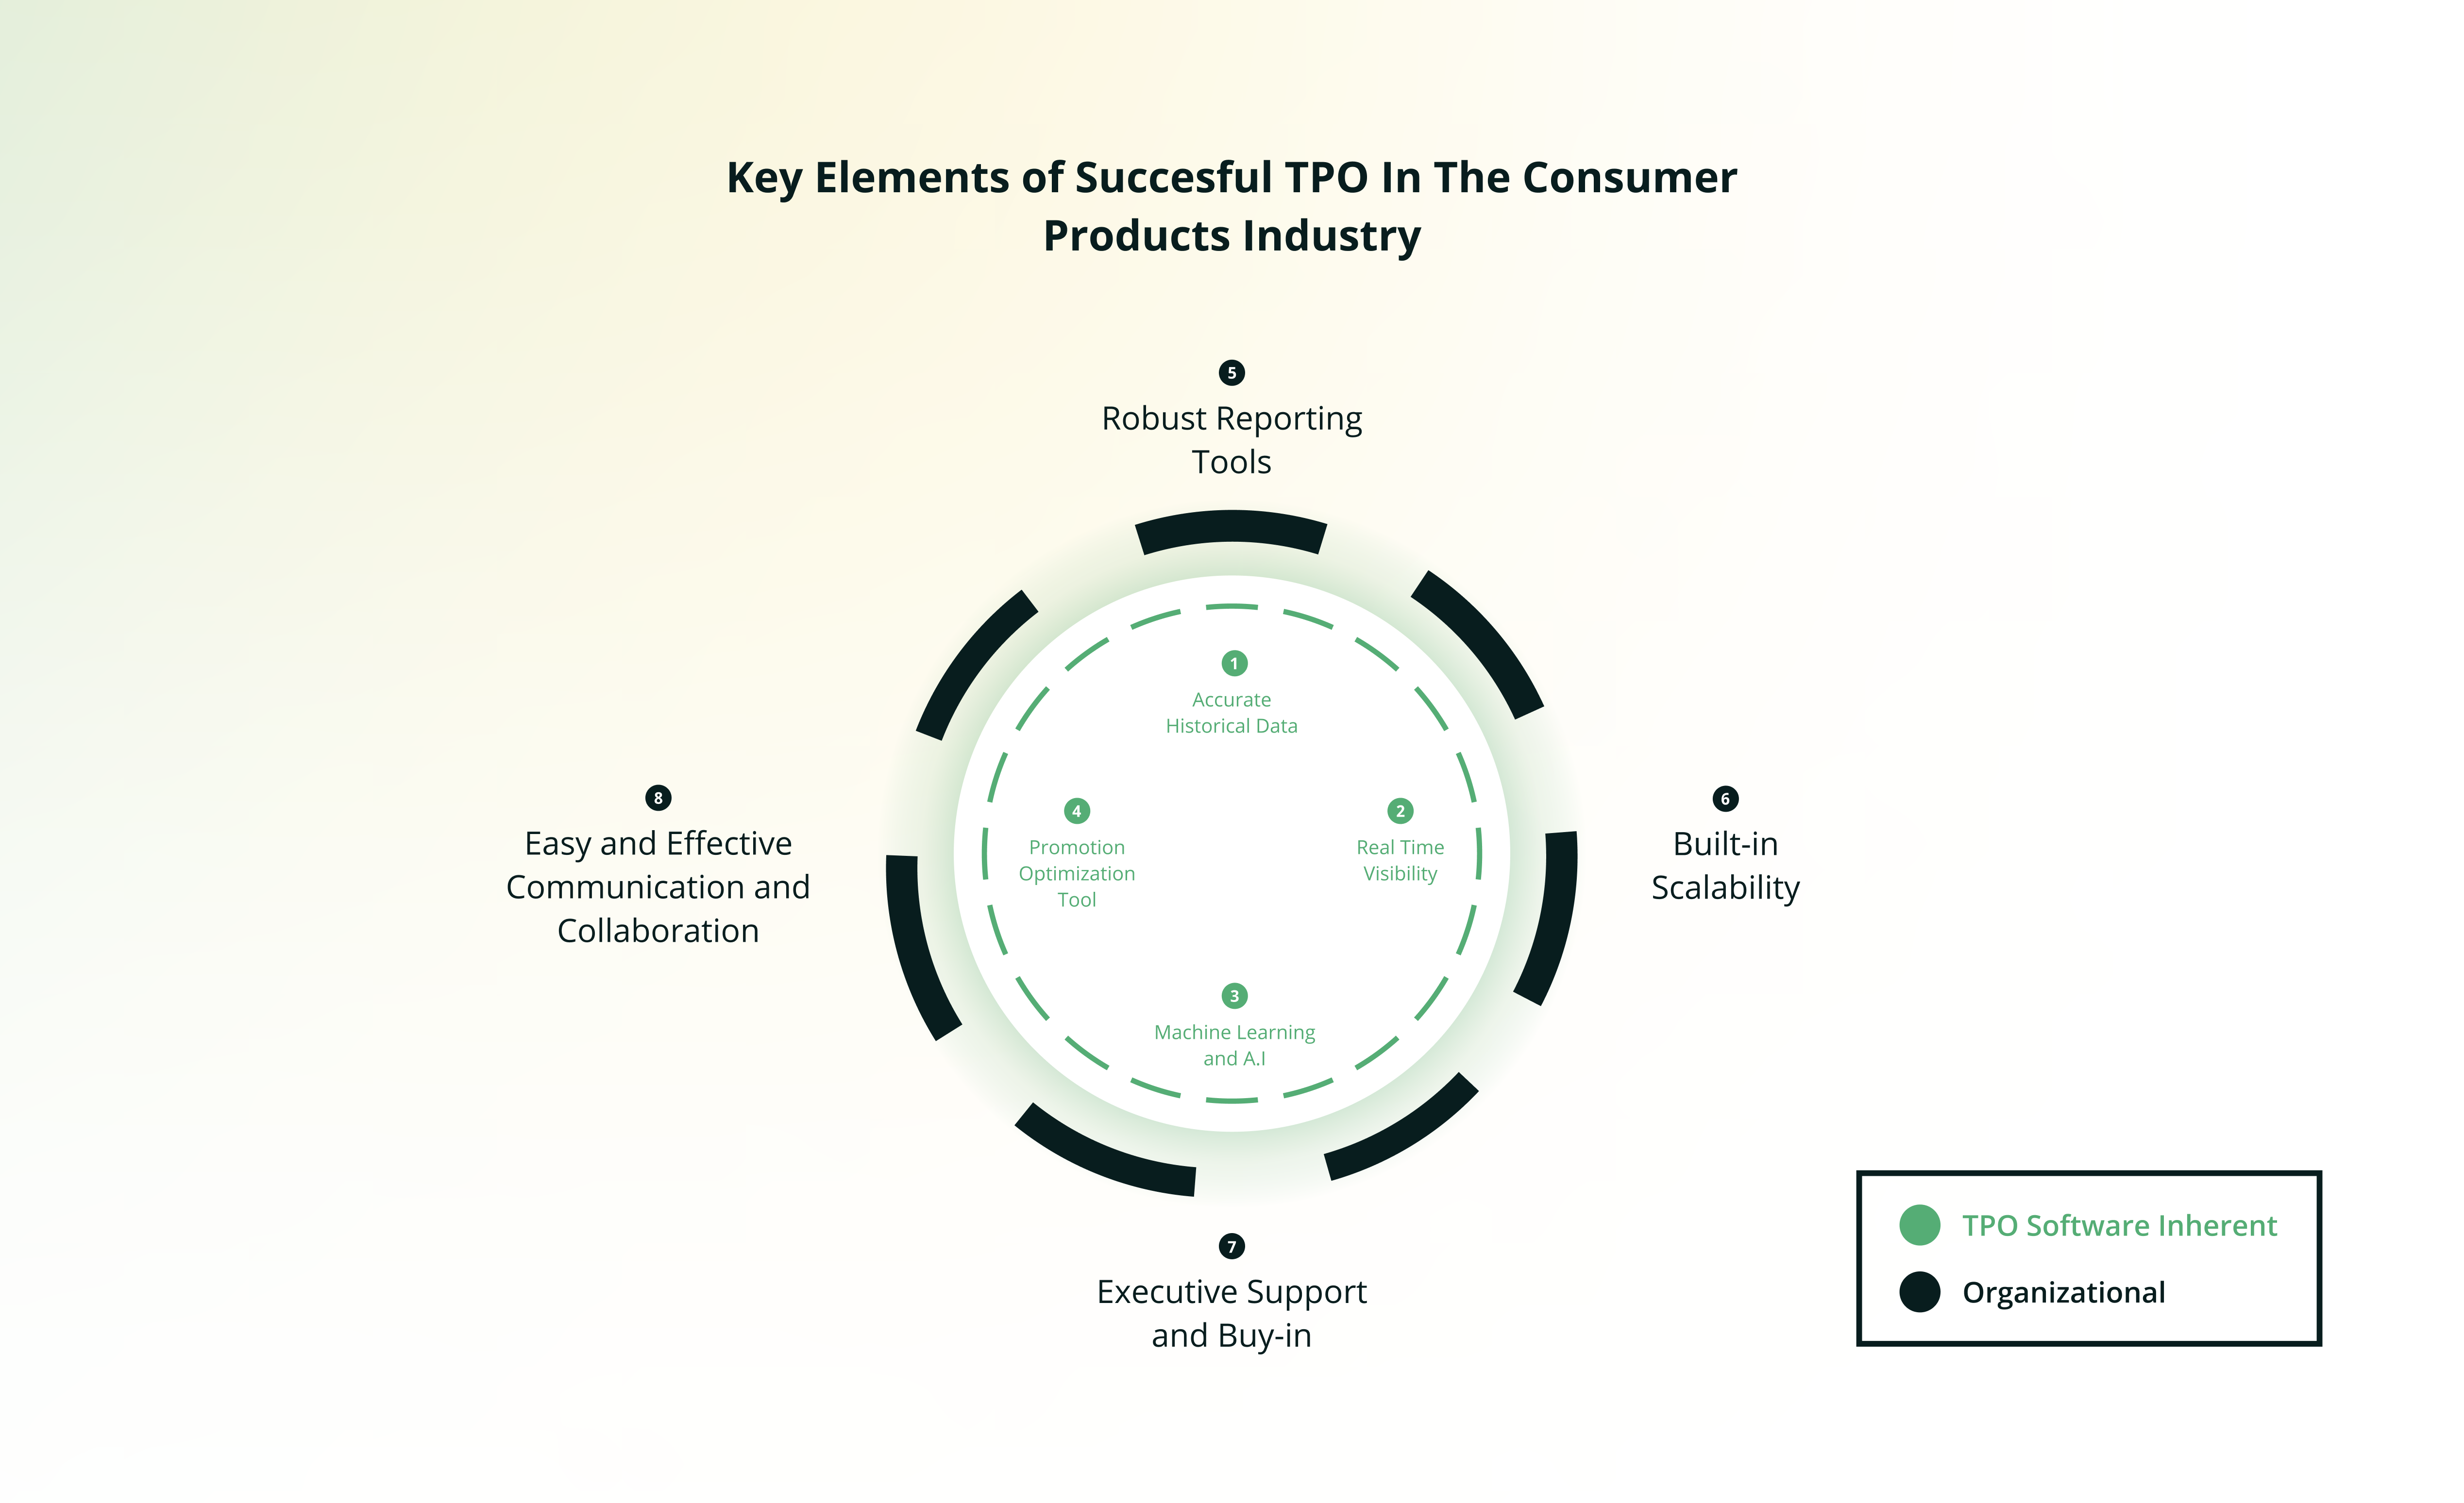 Key Elements of Succesful TPO in the Consumer Products Industry